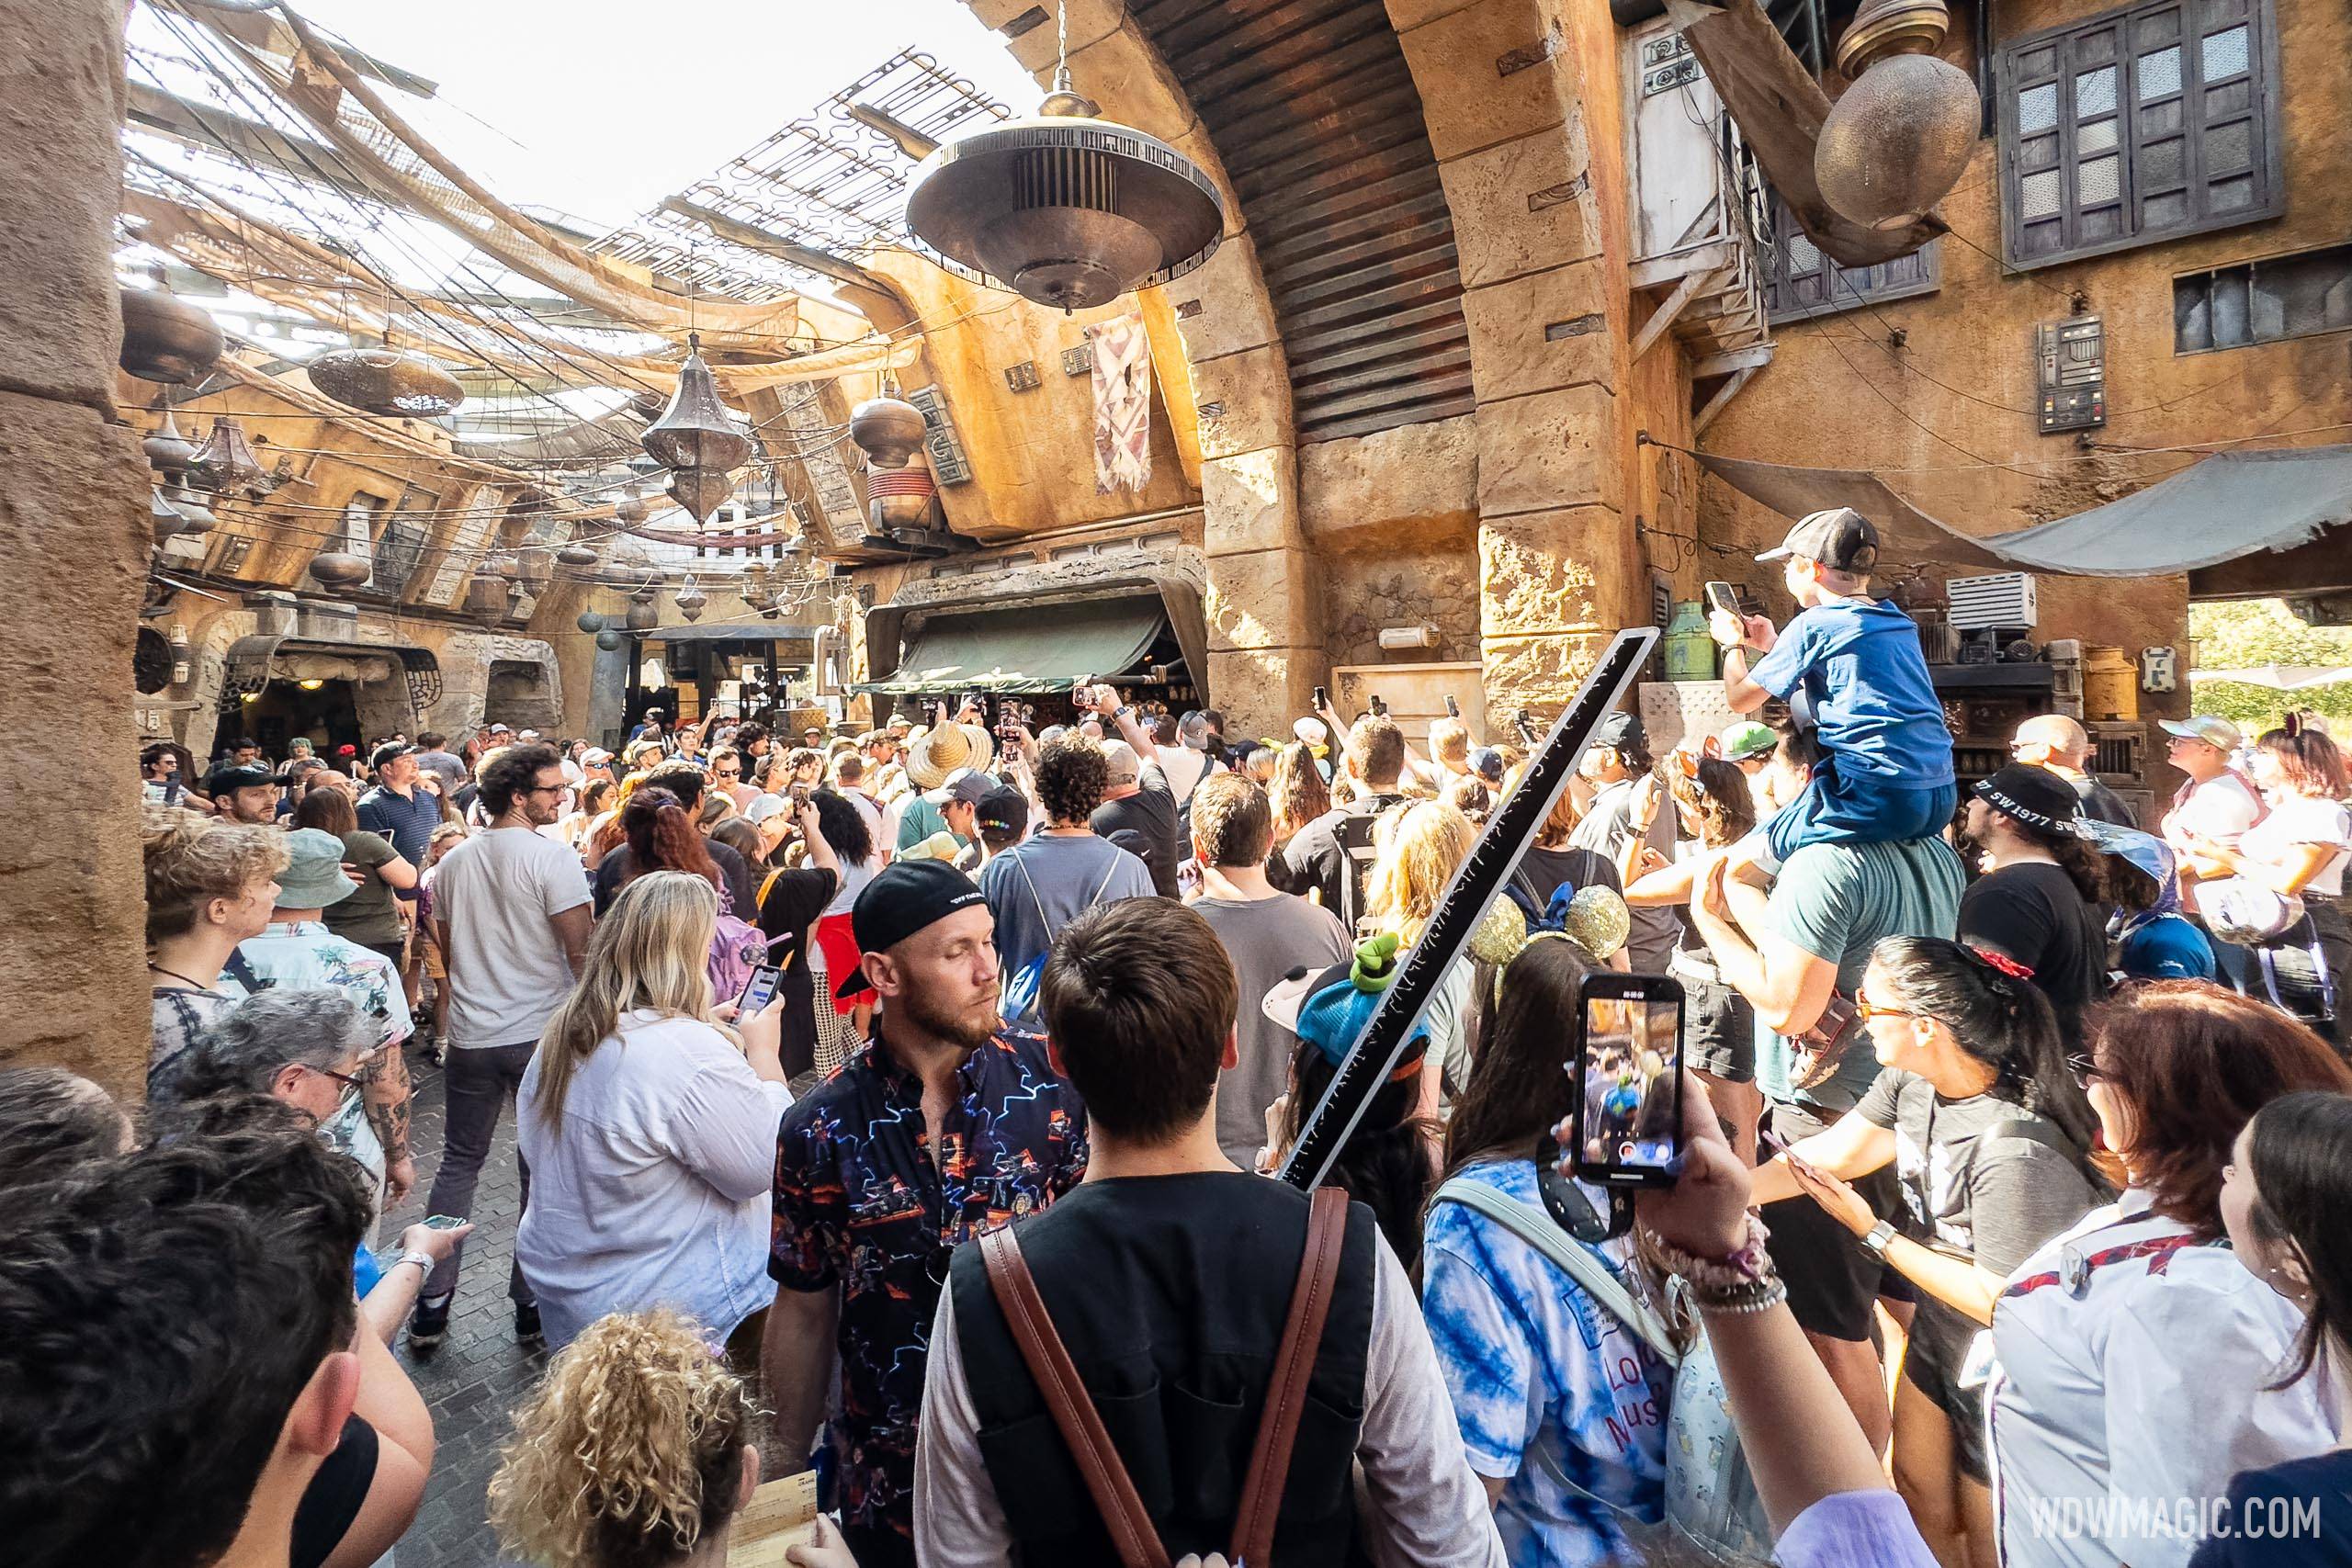 Chaotic scenes in Star Wars Galaxy's Edge at Walt Disney World as guests scramble to see the Mandalorian and Grogu